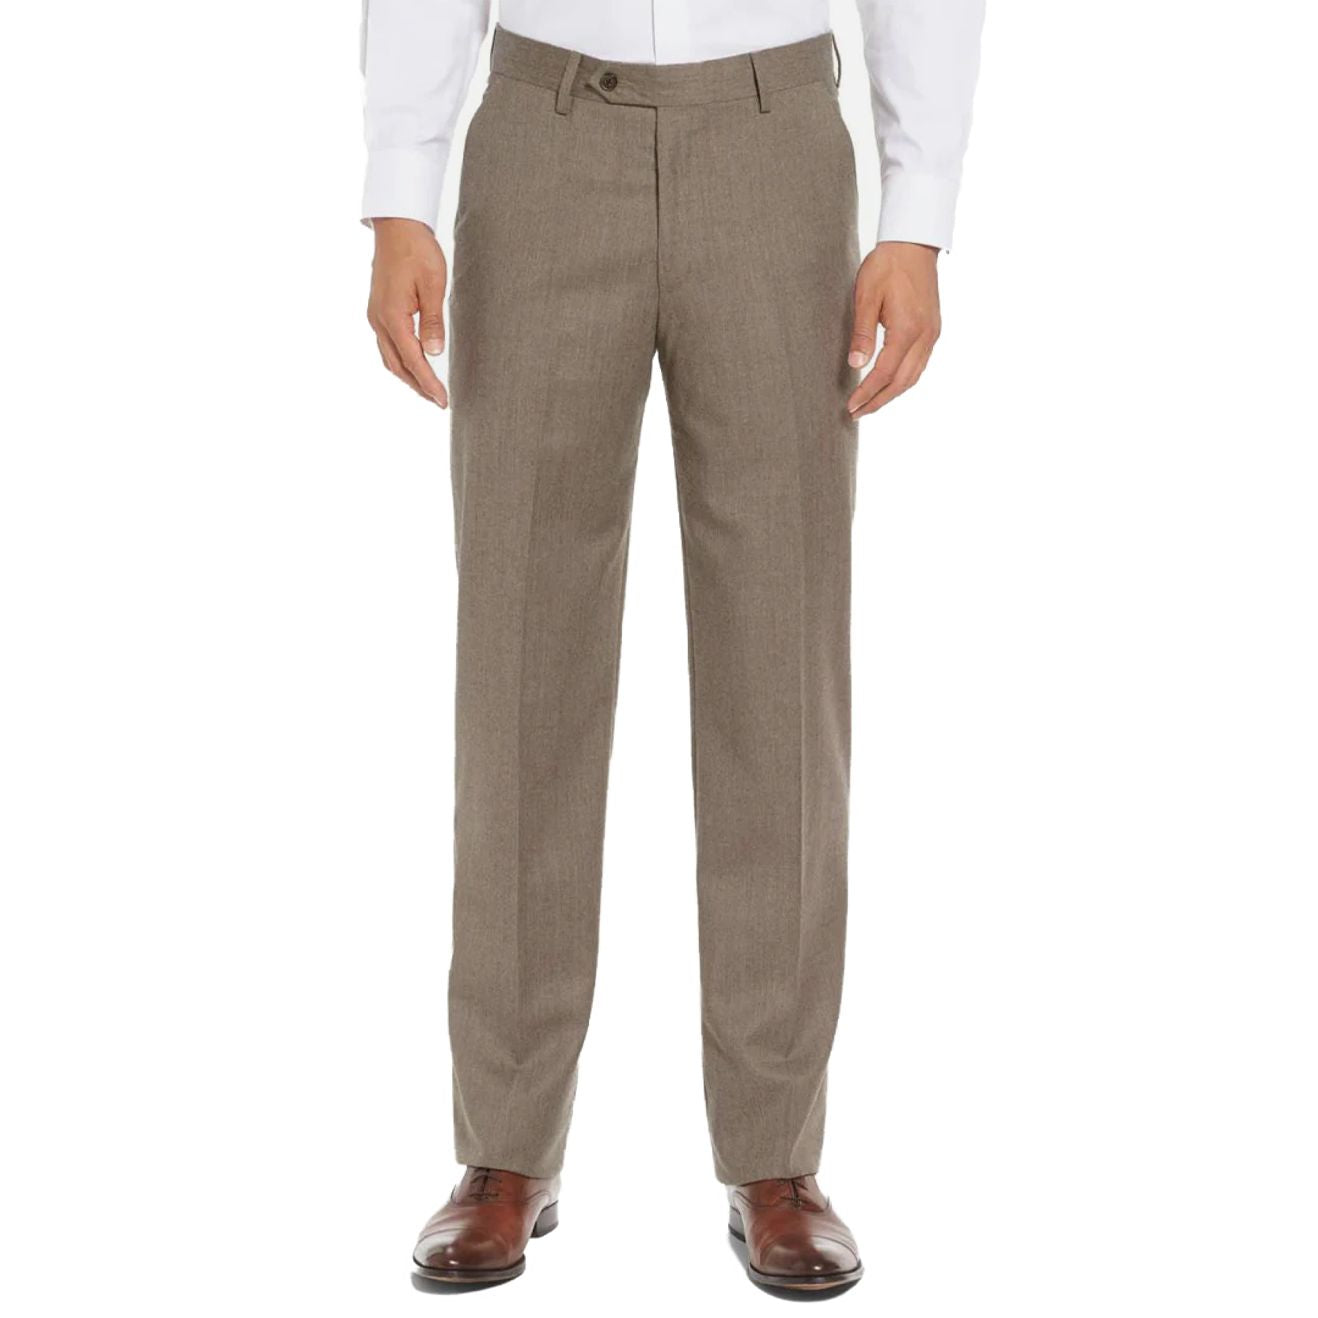 Super 100s Worsted Wool Flannel Trouser in Tan Heather (Hampton Plain